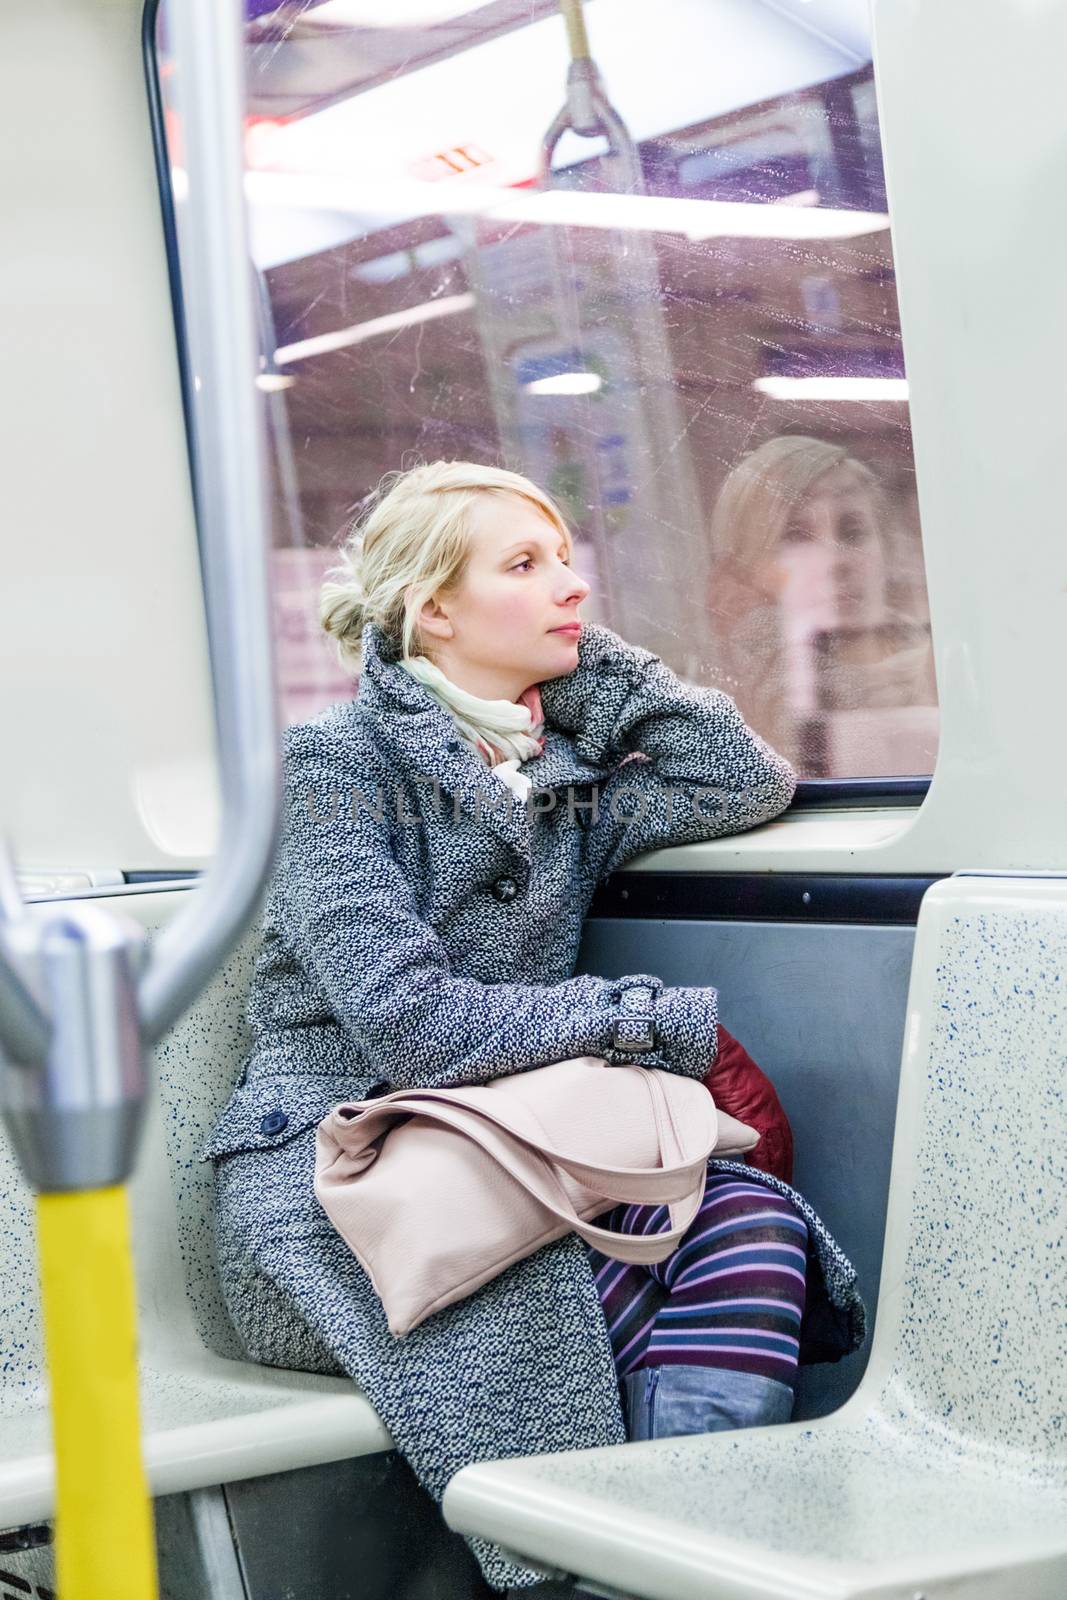 Young Woman Sitting inside a Metro Wagon by aetb